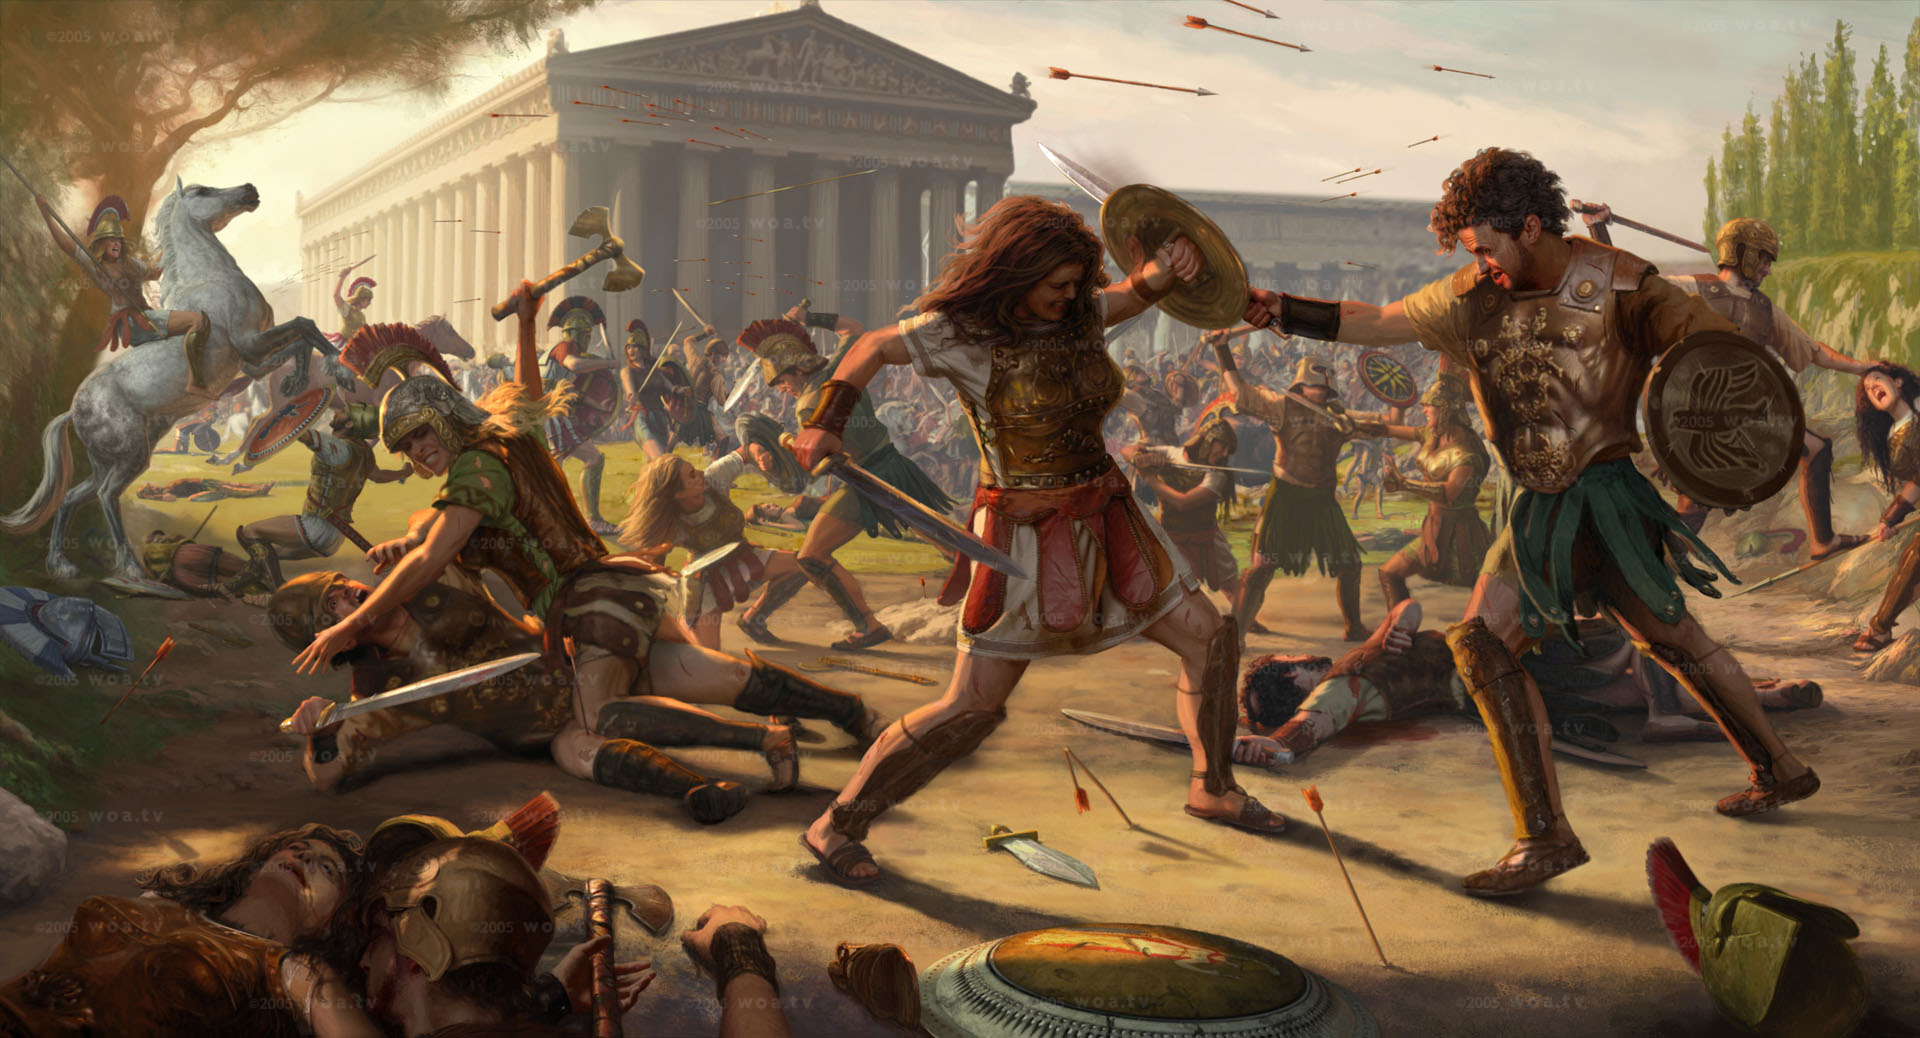 Amazons invaded ancient Athens to recover their kidnapped queen.